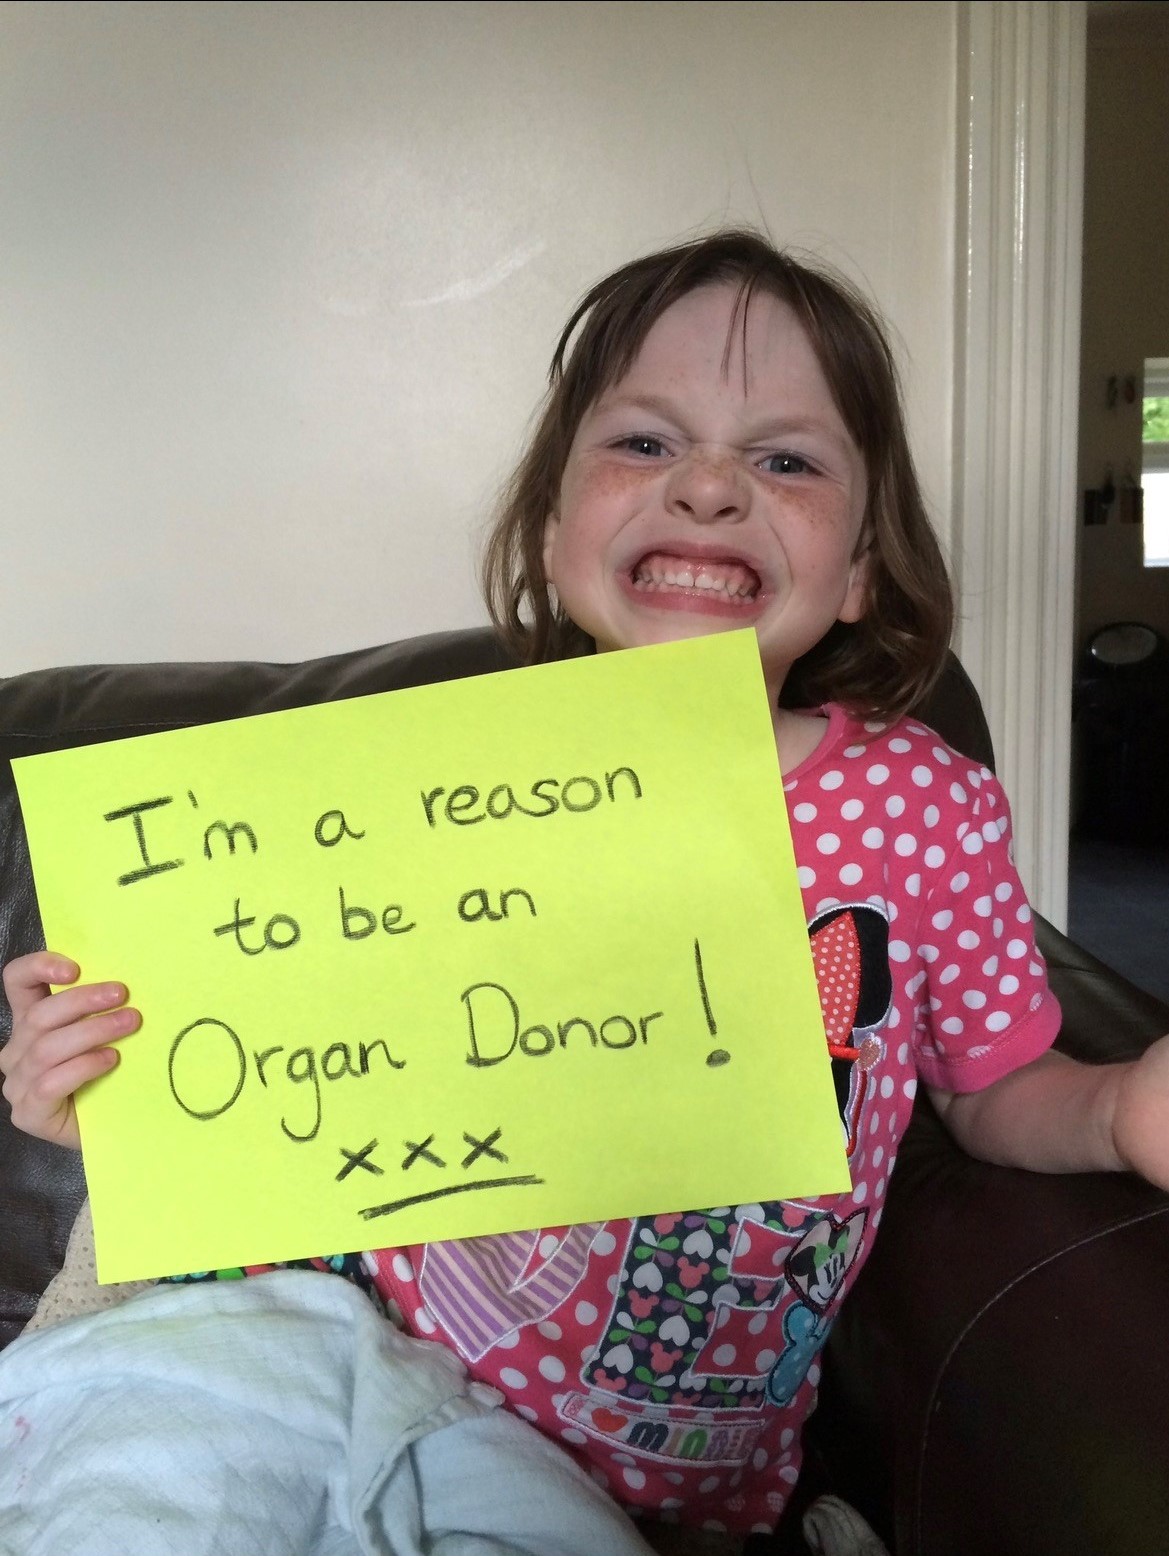 Young Ava holding a sign saying 'I'm a reason to be an organ donor!'